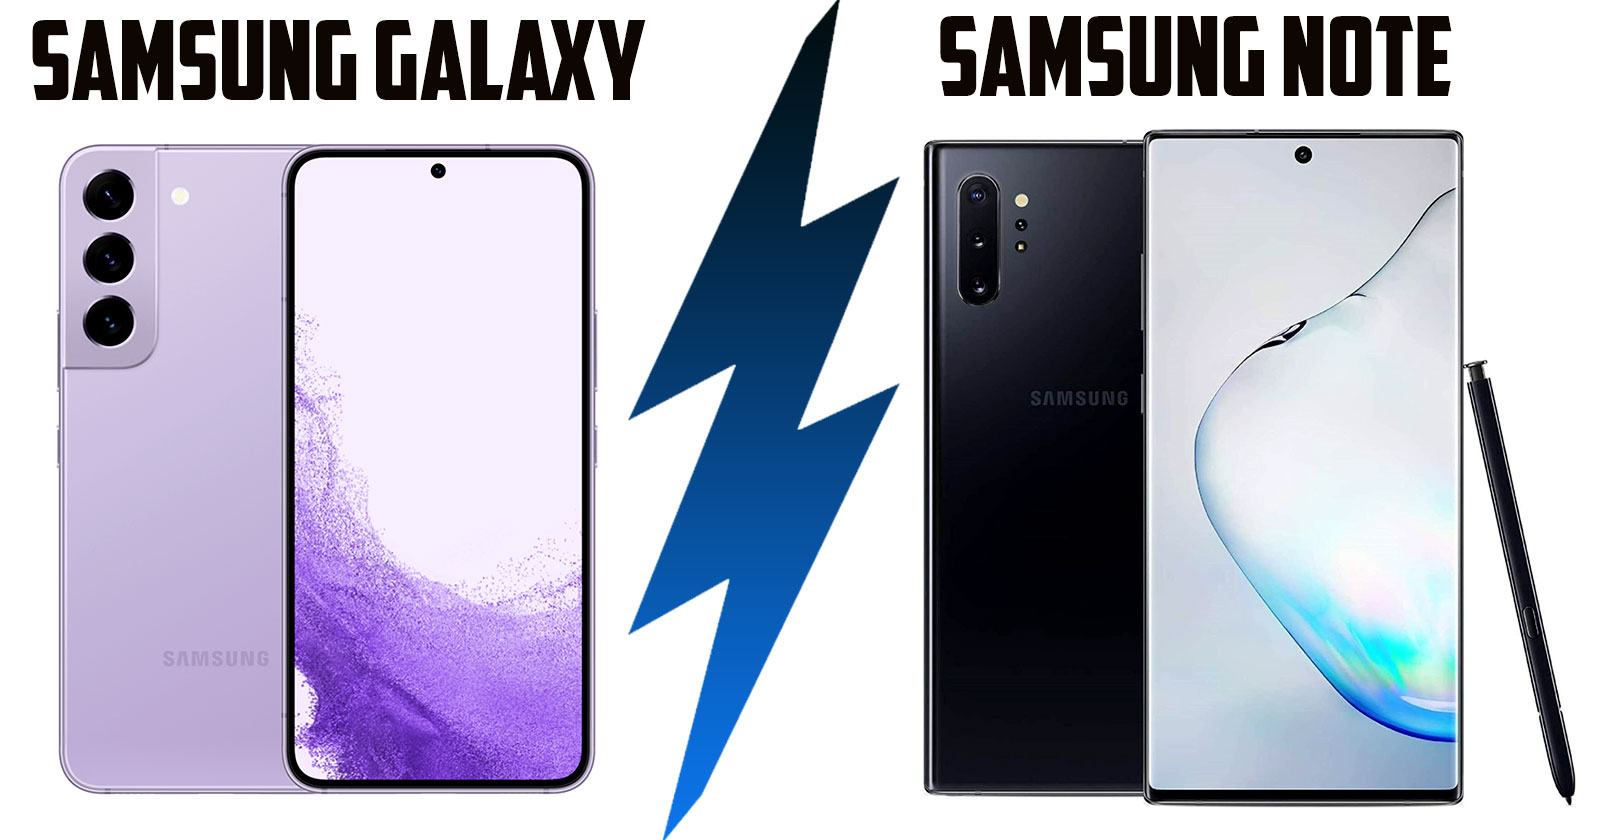 What Is the Difference Between a Samsung Note and Galaxy